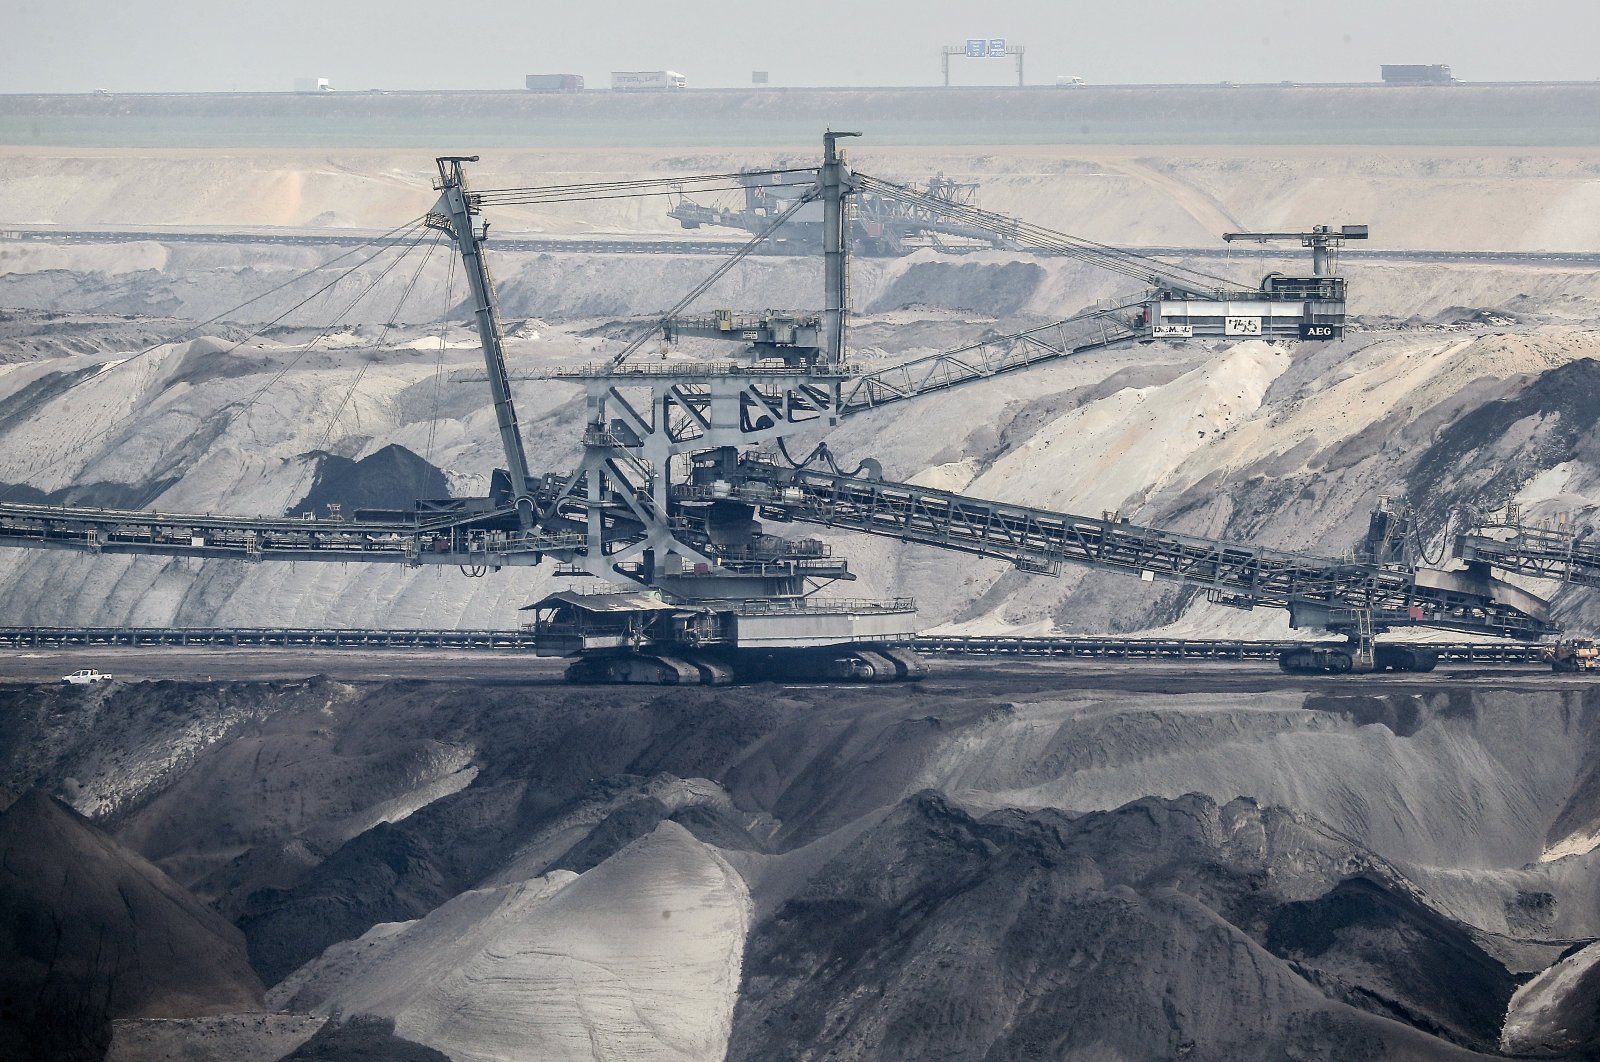 Giant bucket-wheel excavators extract coal at the controversial Garzweiler surface coal mine near Jackerath, western Germany, April 29, 2021. (AP Photo)